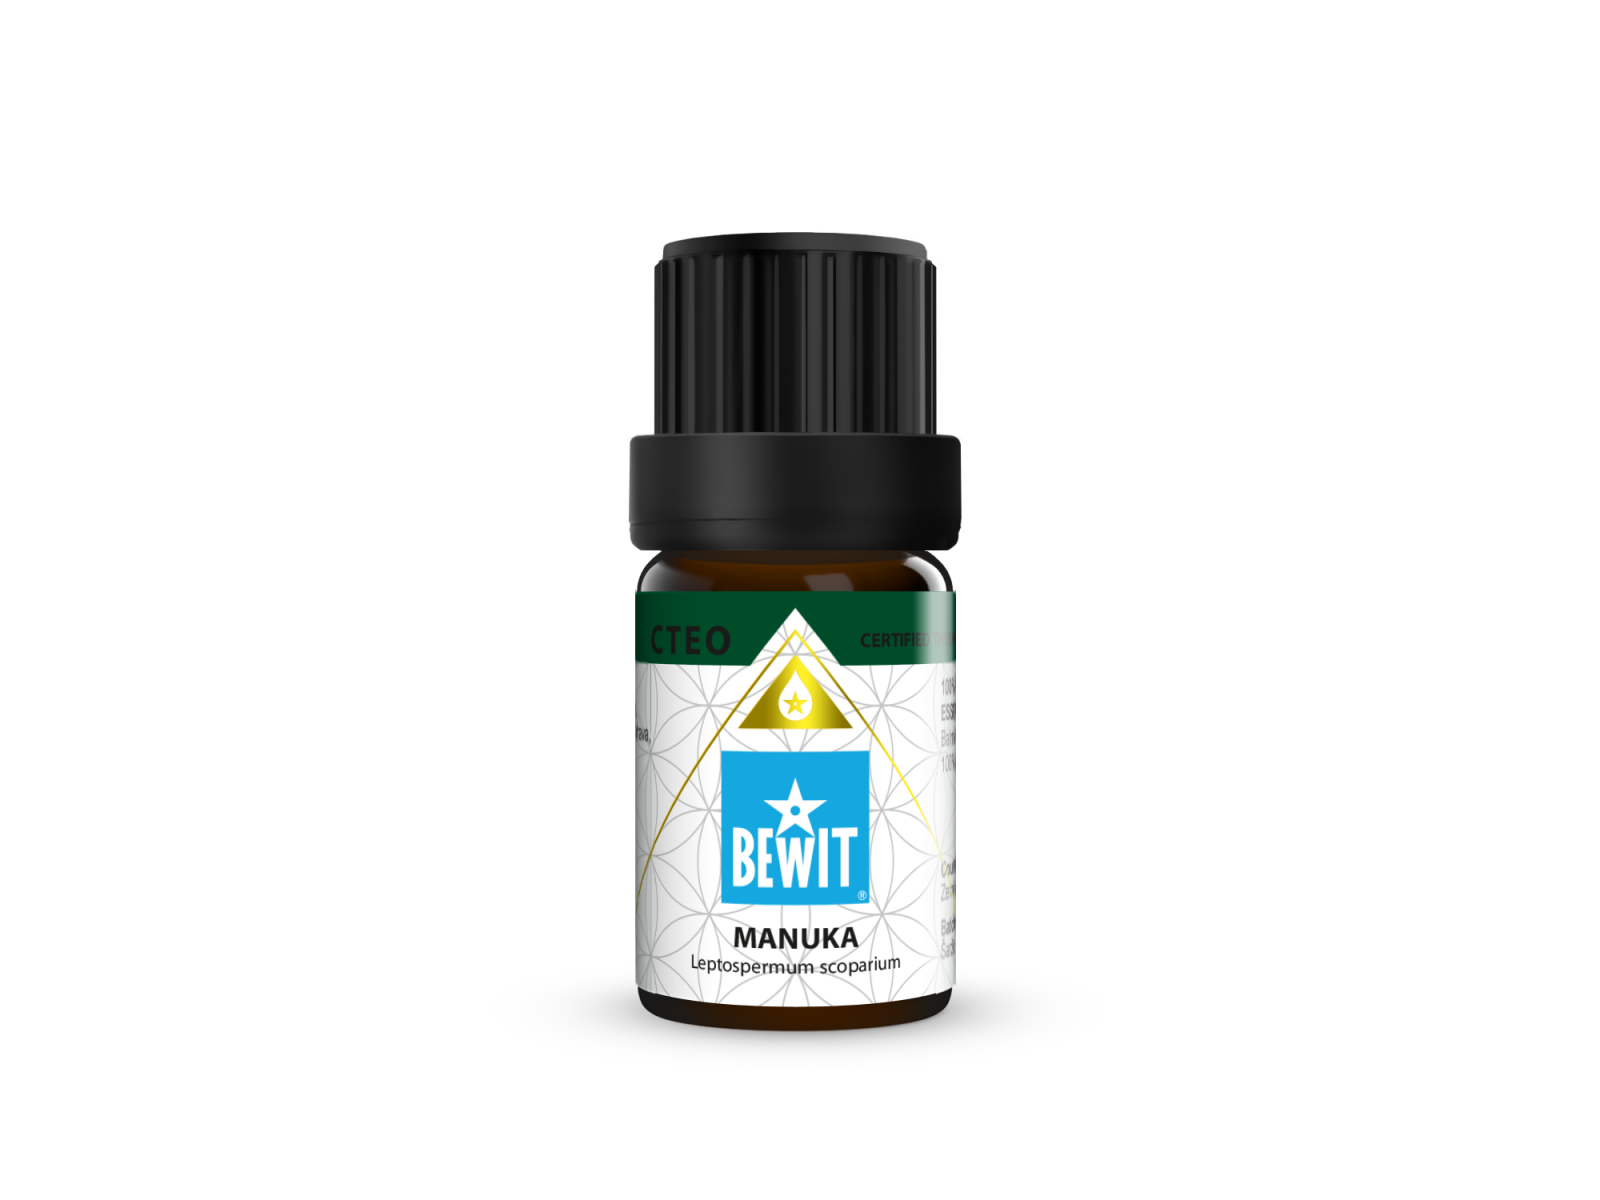 BEWIT Manuka - 100% pure and natural CTEO® essential oil - 2